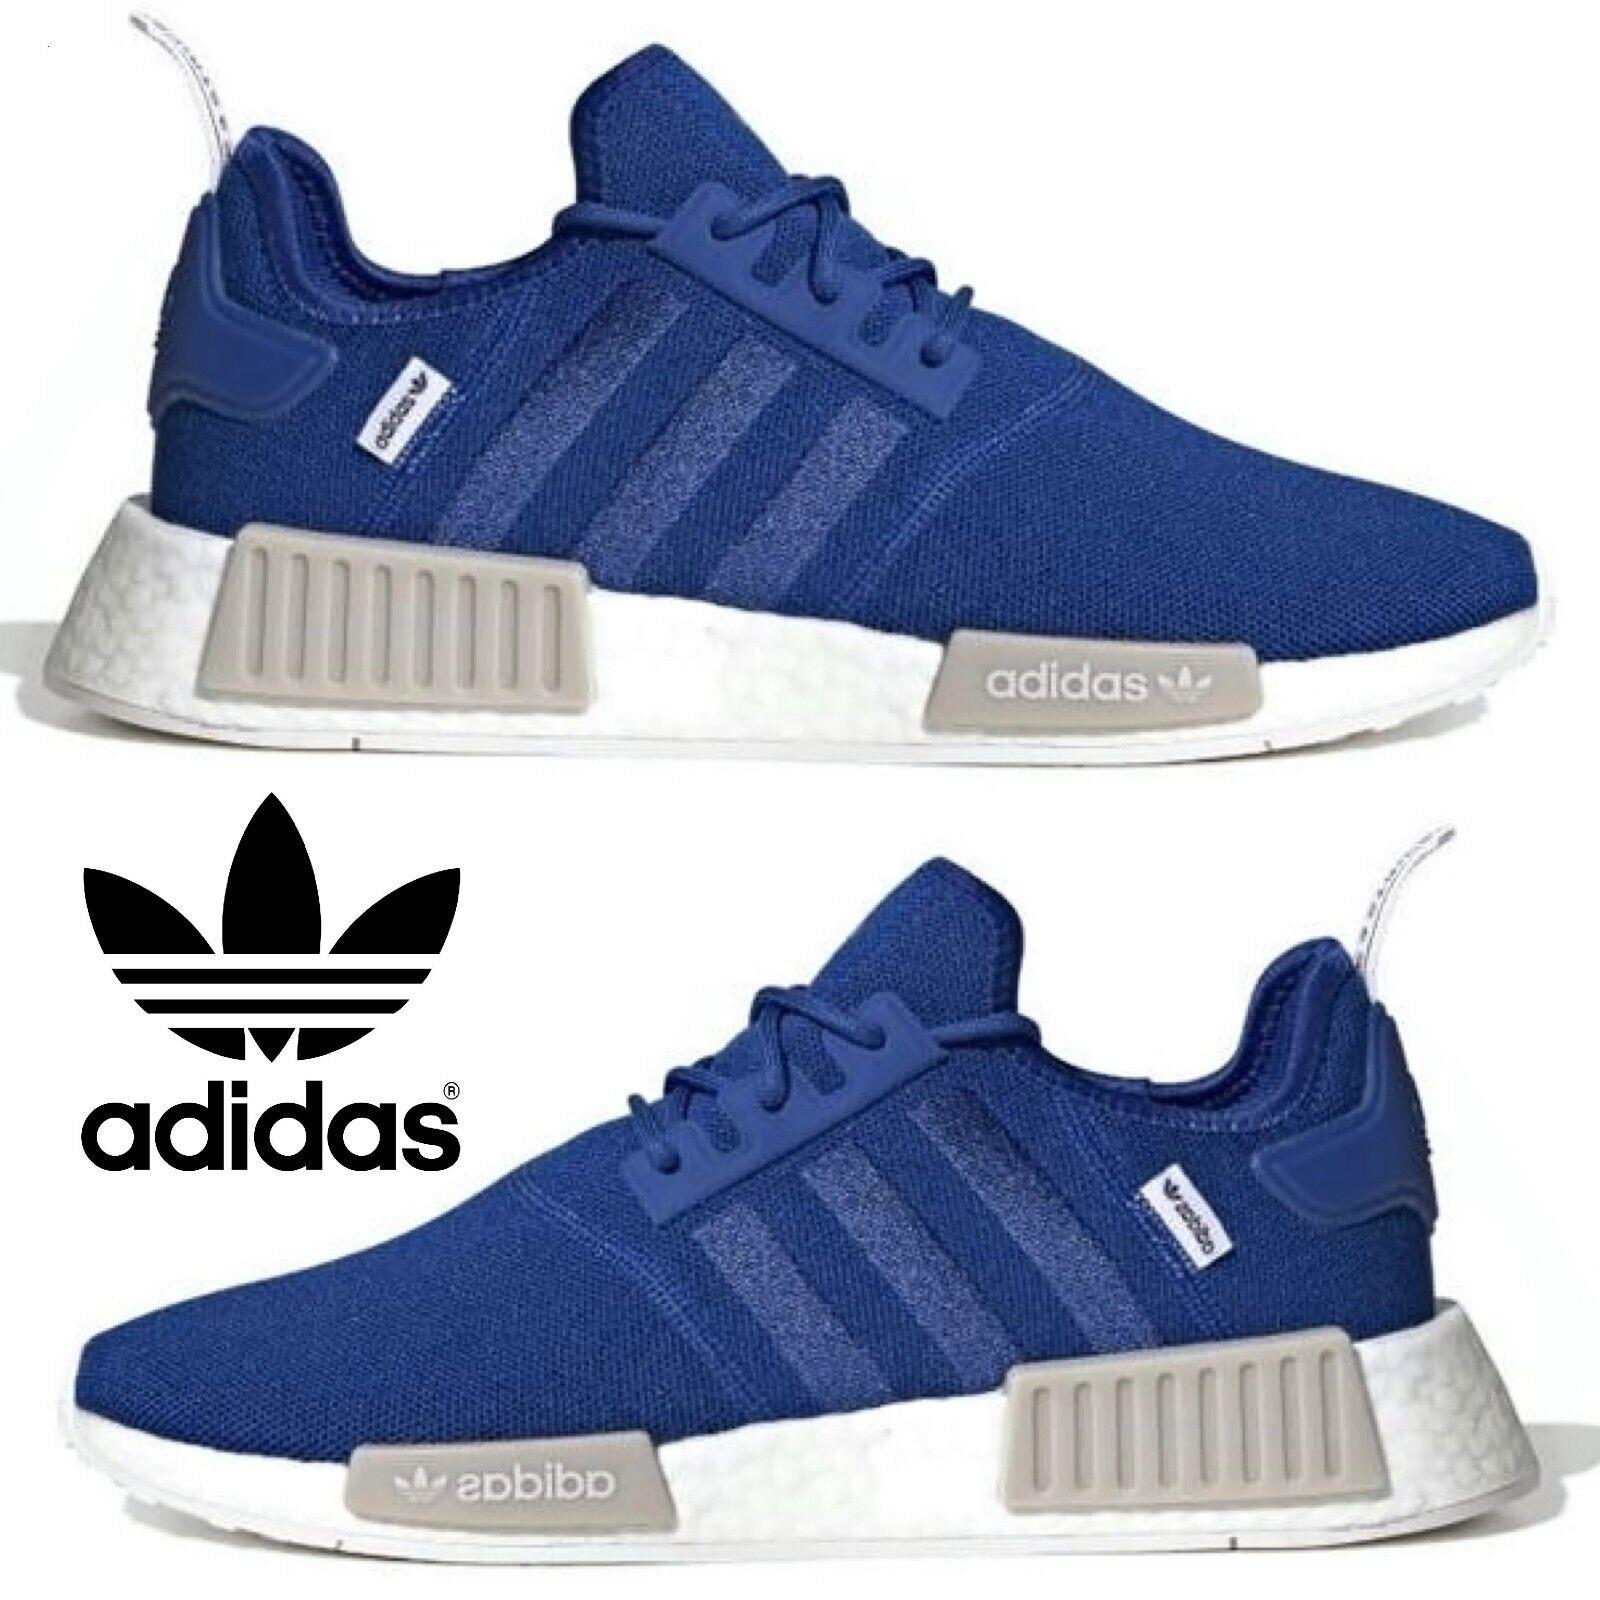 Adidas Originals Nmd R1 Men`s Sneakers Running Shoes Gym Casual Sport Royal Blue